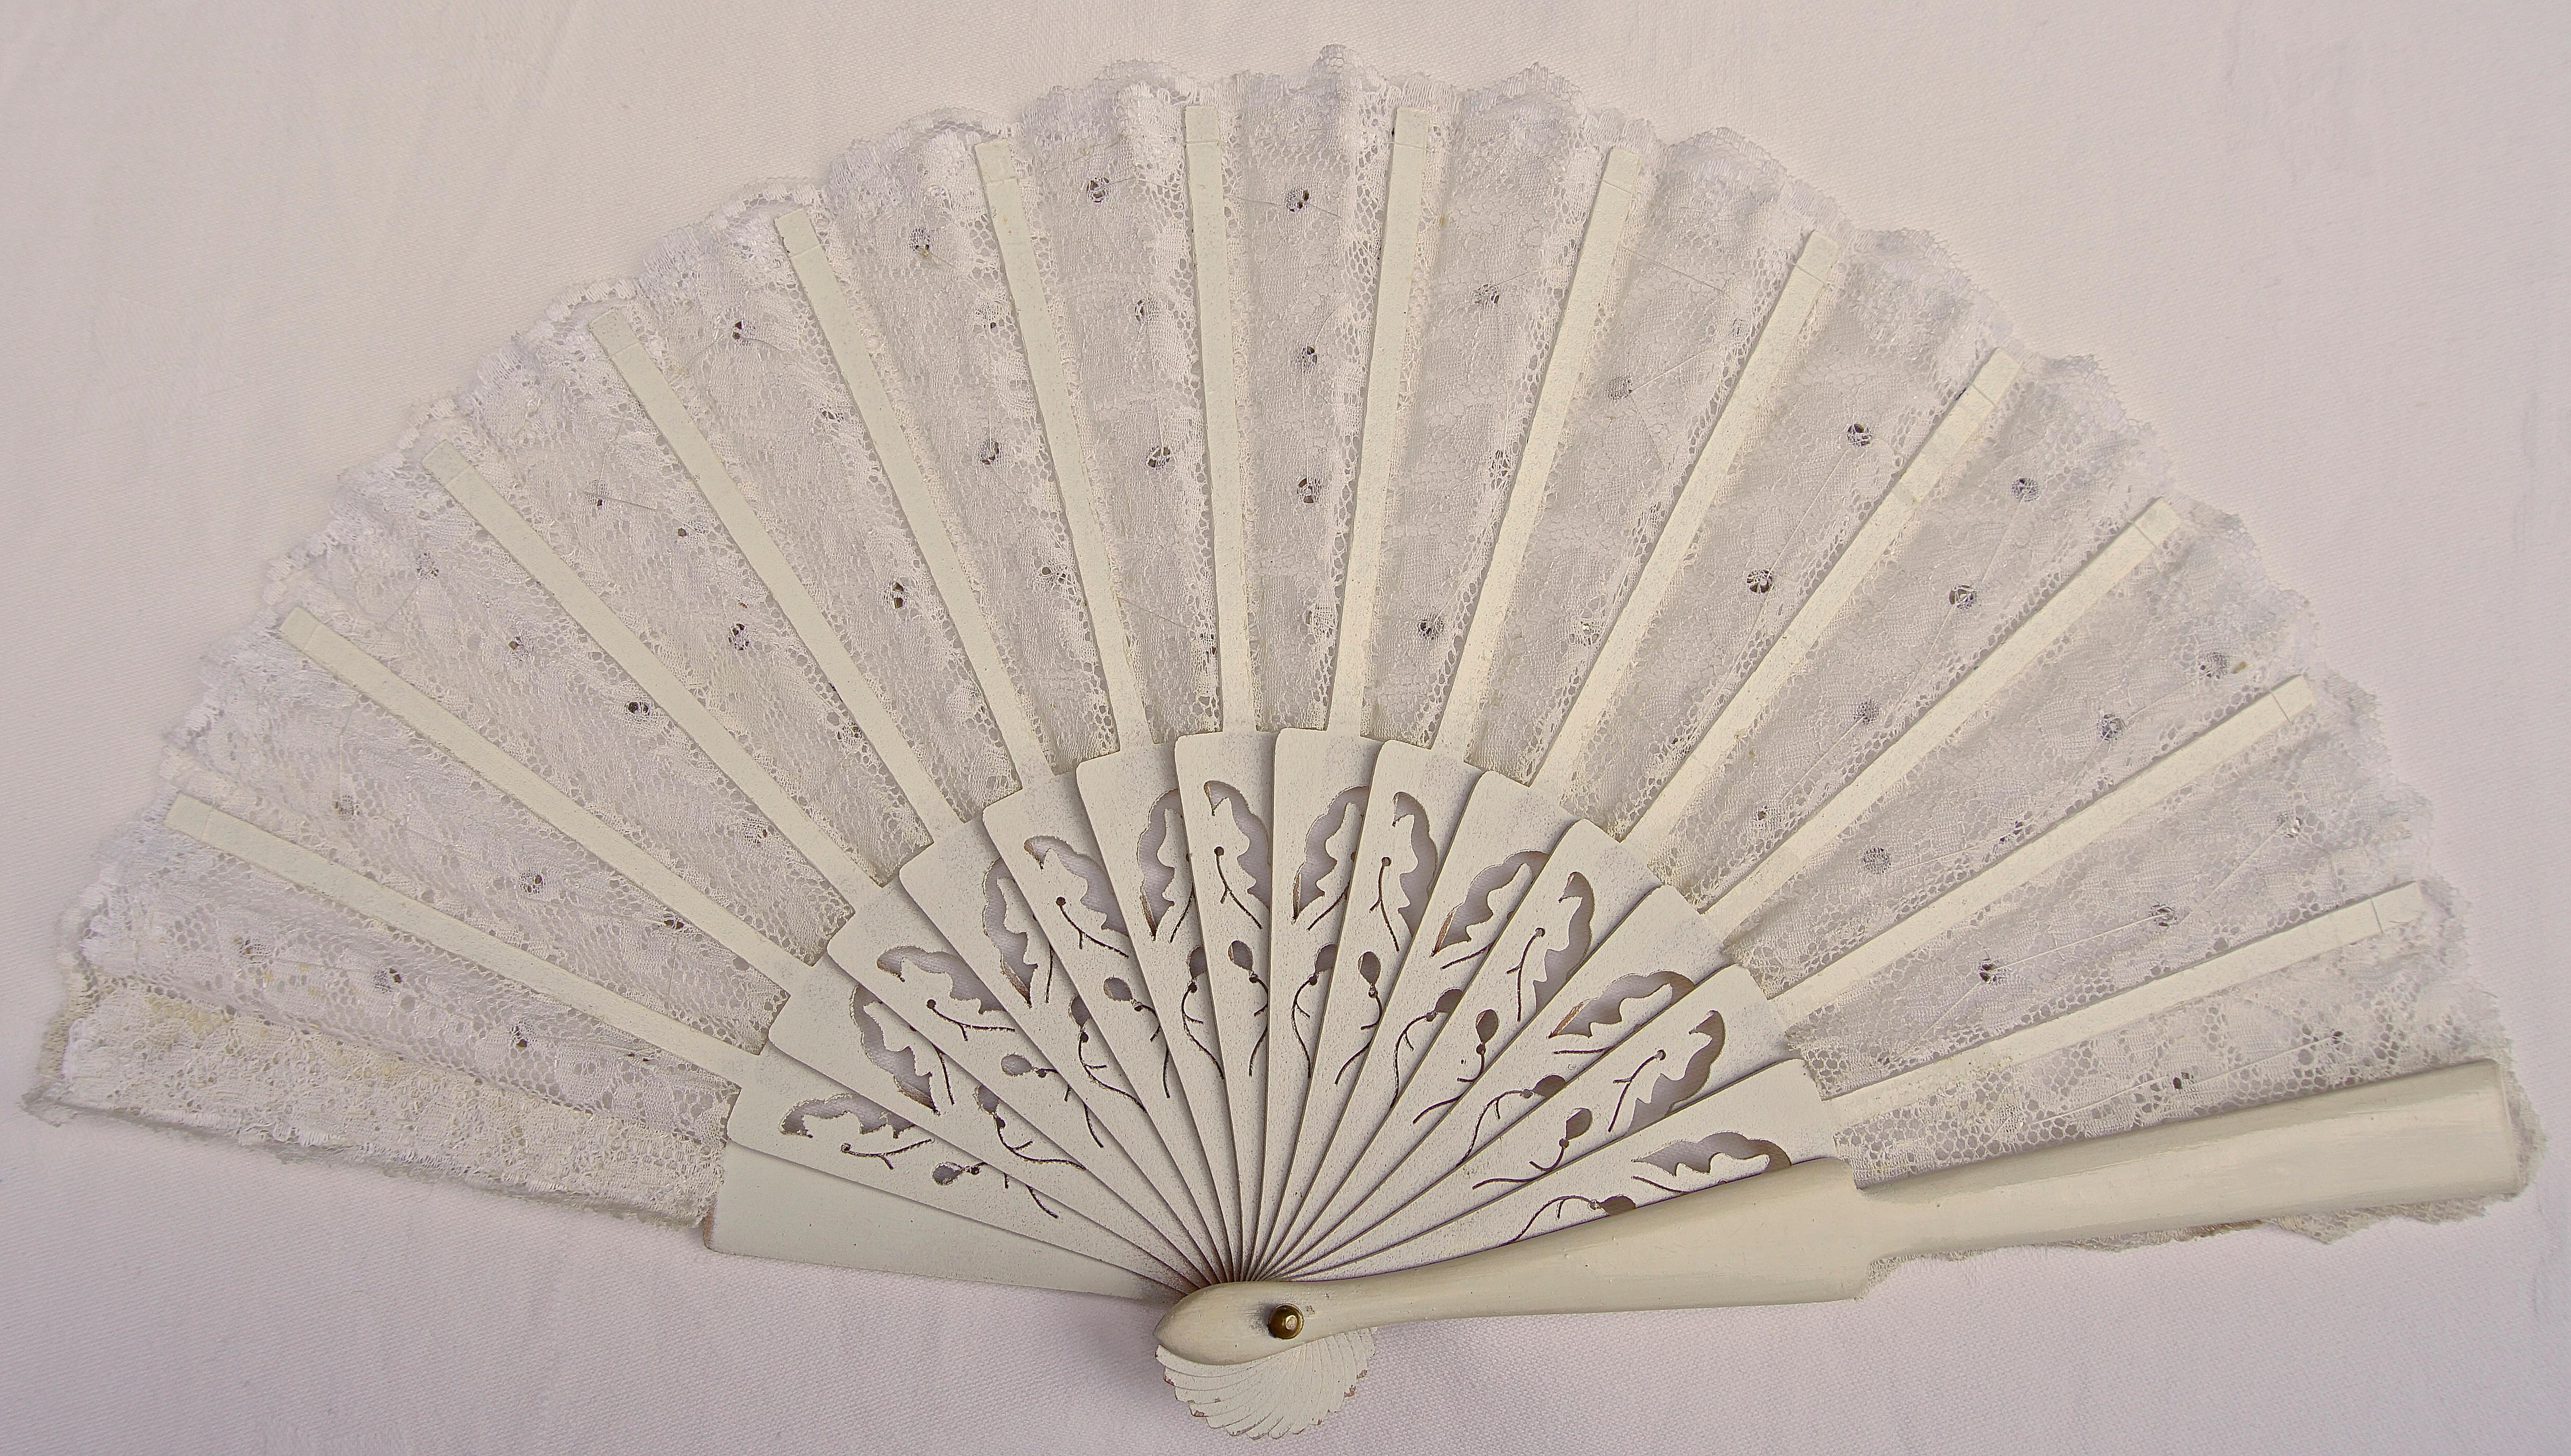 Vintage white lace handheld fan with hand sewn matt silver sequins. Measuring 35.6cm, 14 inches, by 20cm, 7.87 inches.
The wood frame and sticks are hand painted in shiny cream with gold decoration.

This beautiful fan is in very good condition, it